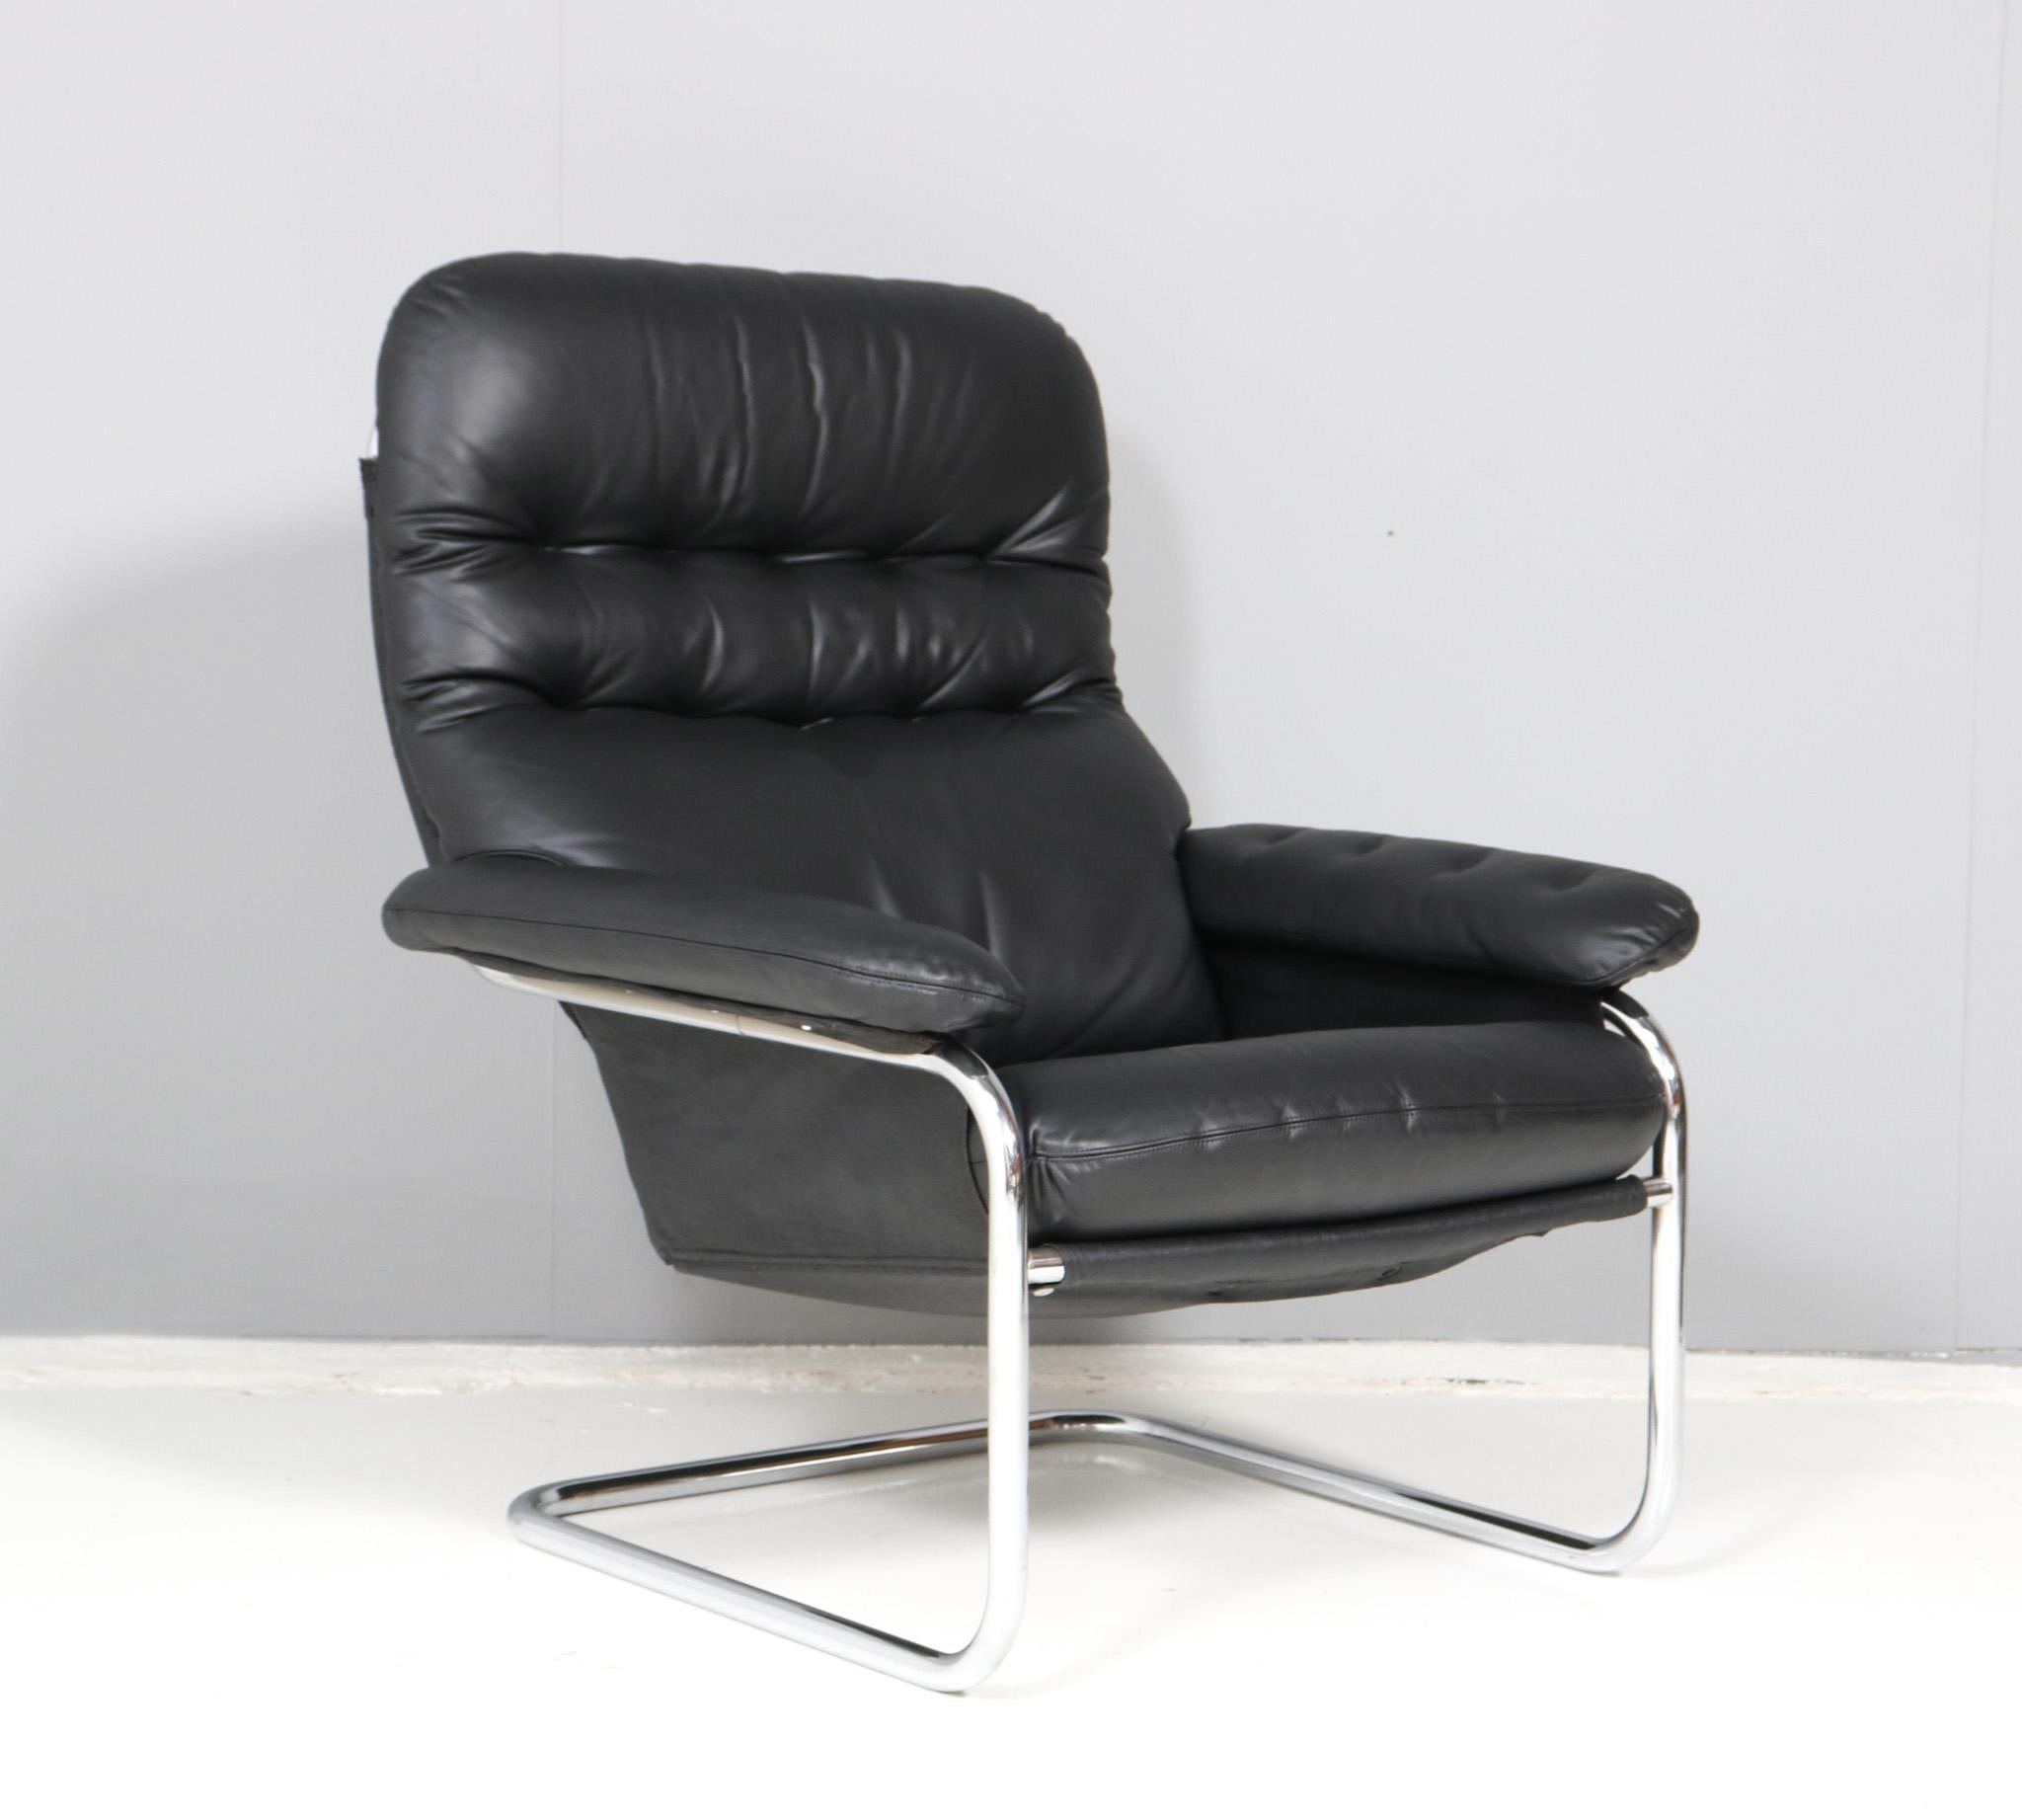 Mid-Century Modern Cantilever Lounge Chair by Sam Larsson for Dux, 1972 In Good Condition For Sale In Amsterdam, NL